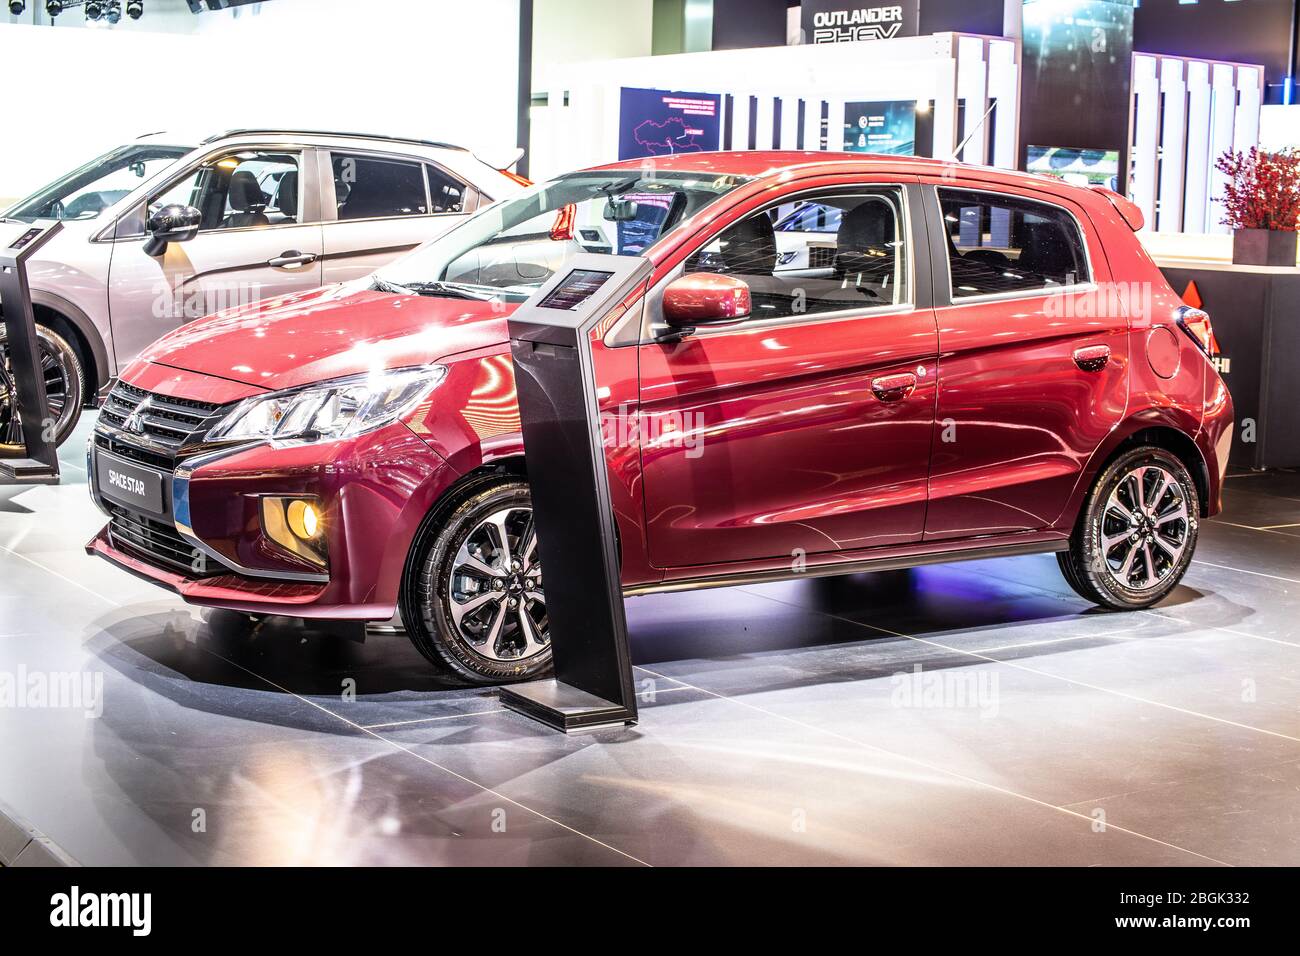 Mitsubishi Space Star High Resolution Stock Photography and Images - Alamy